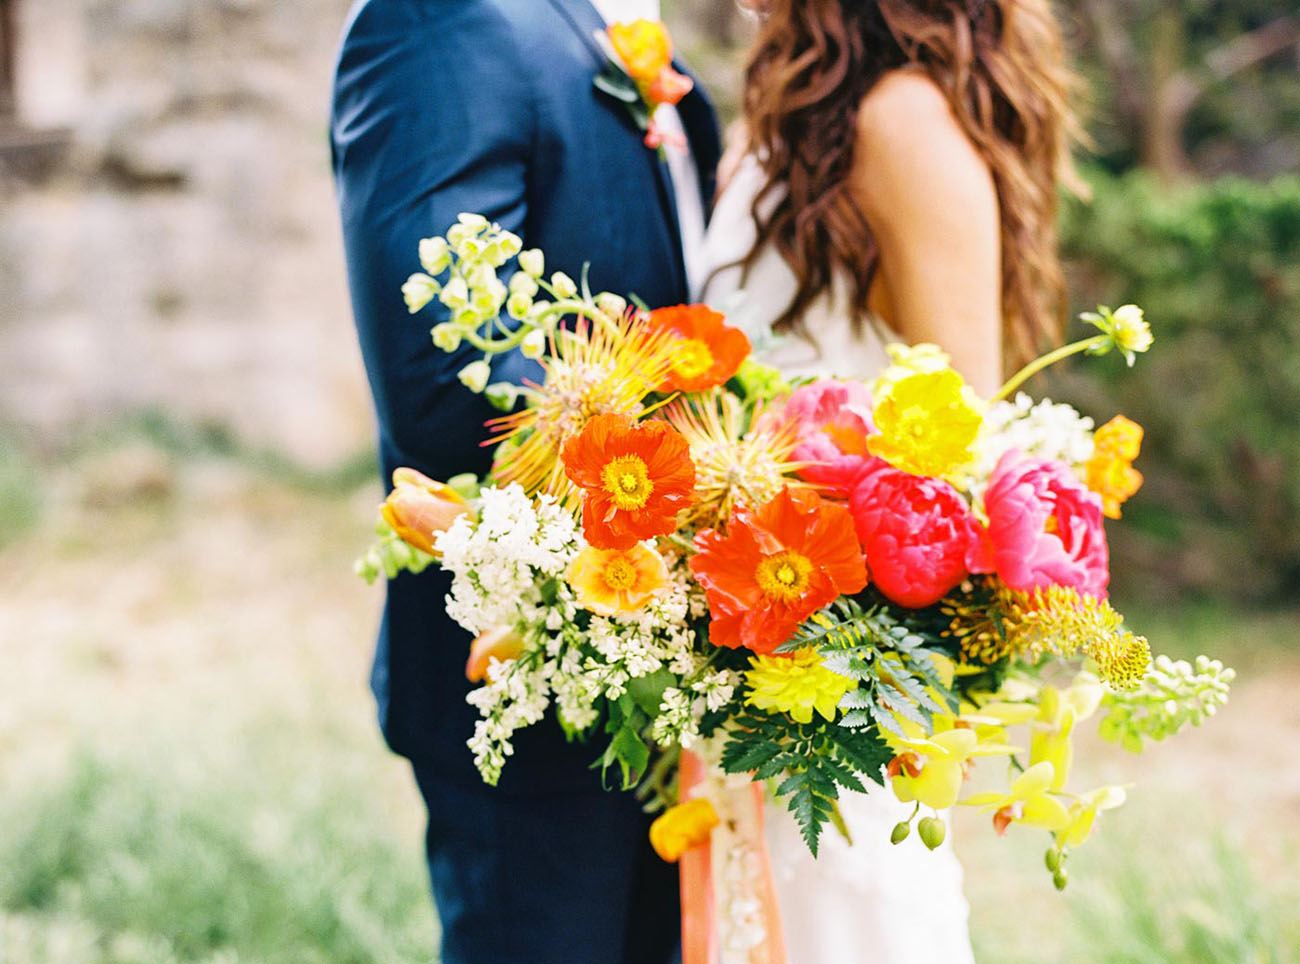 The bride was rocking a super bold bouquet in pink, yellow, red and orange